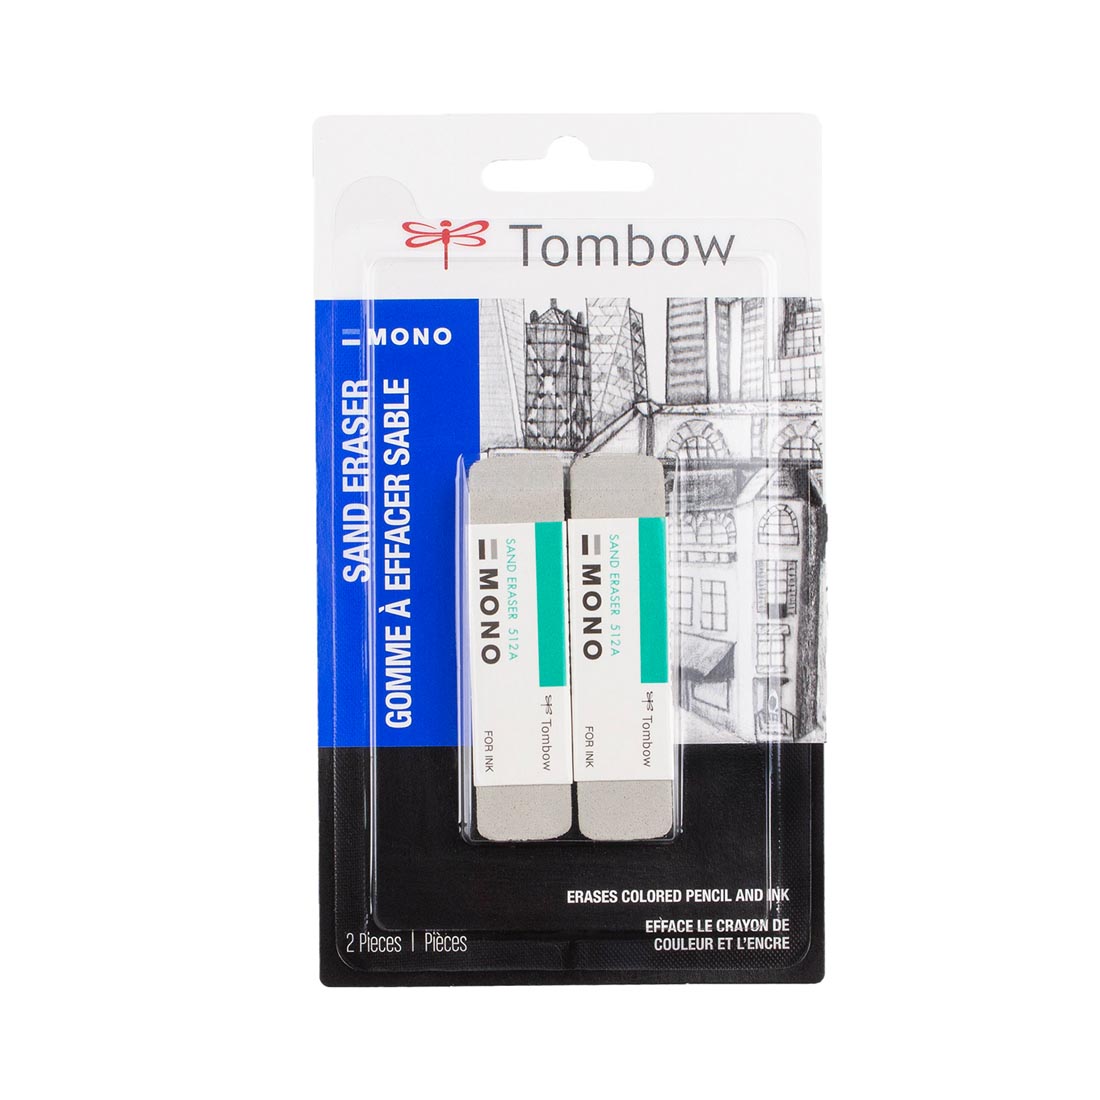 Tombow MONO Sand Erasers in package